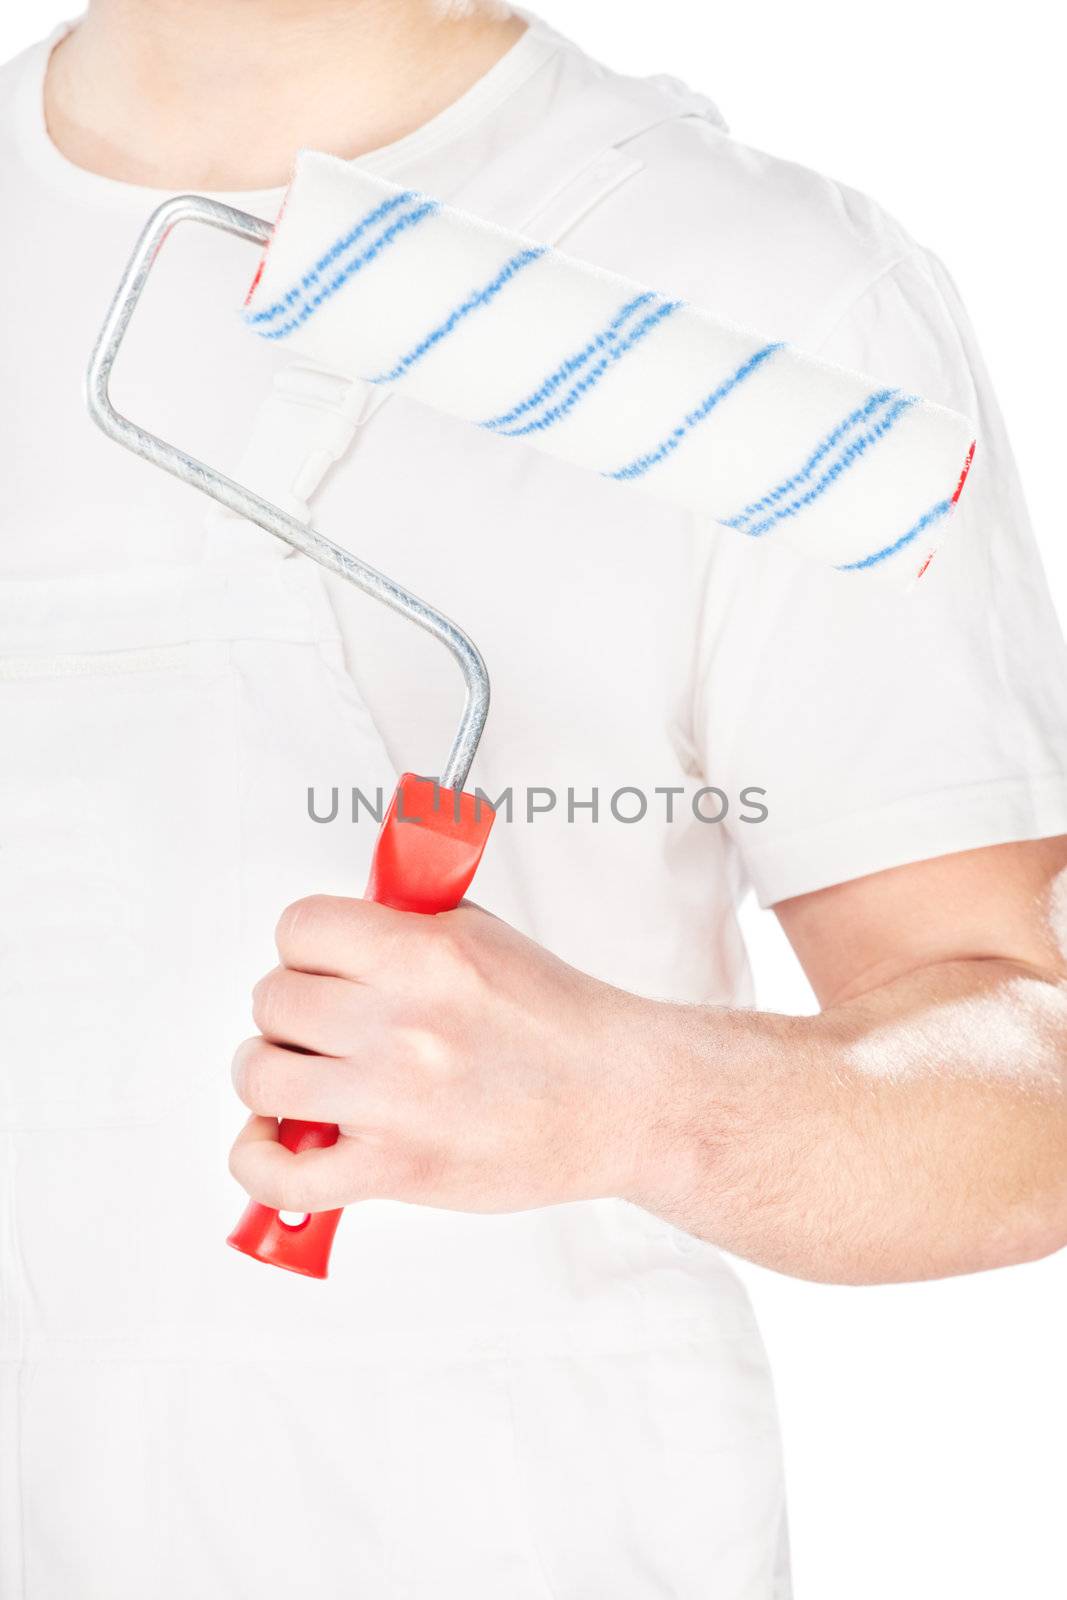 paint roller in hand of a worker, isolated on white